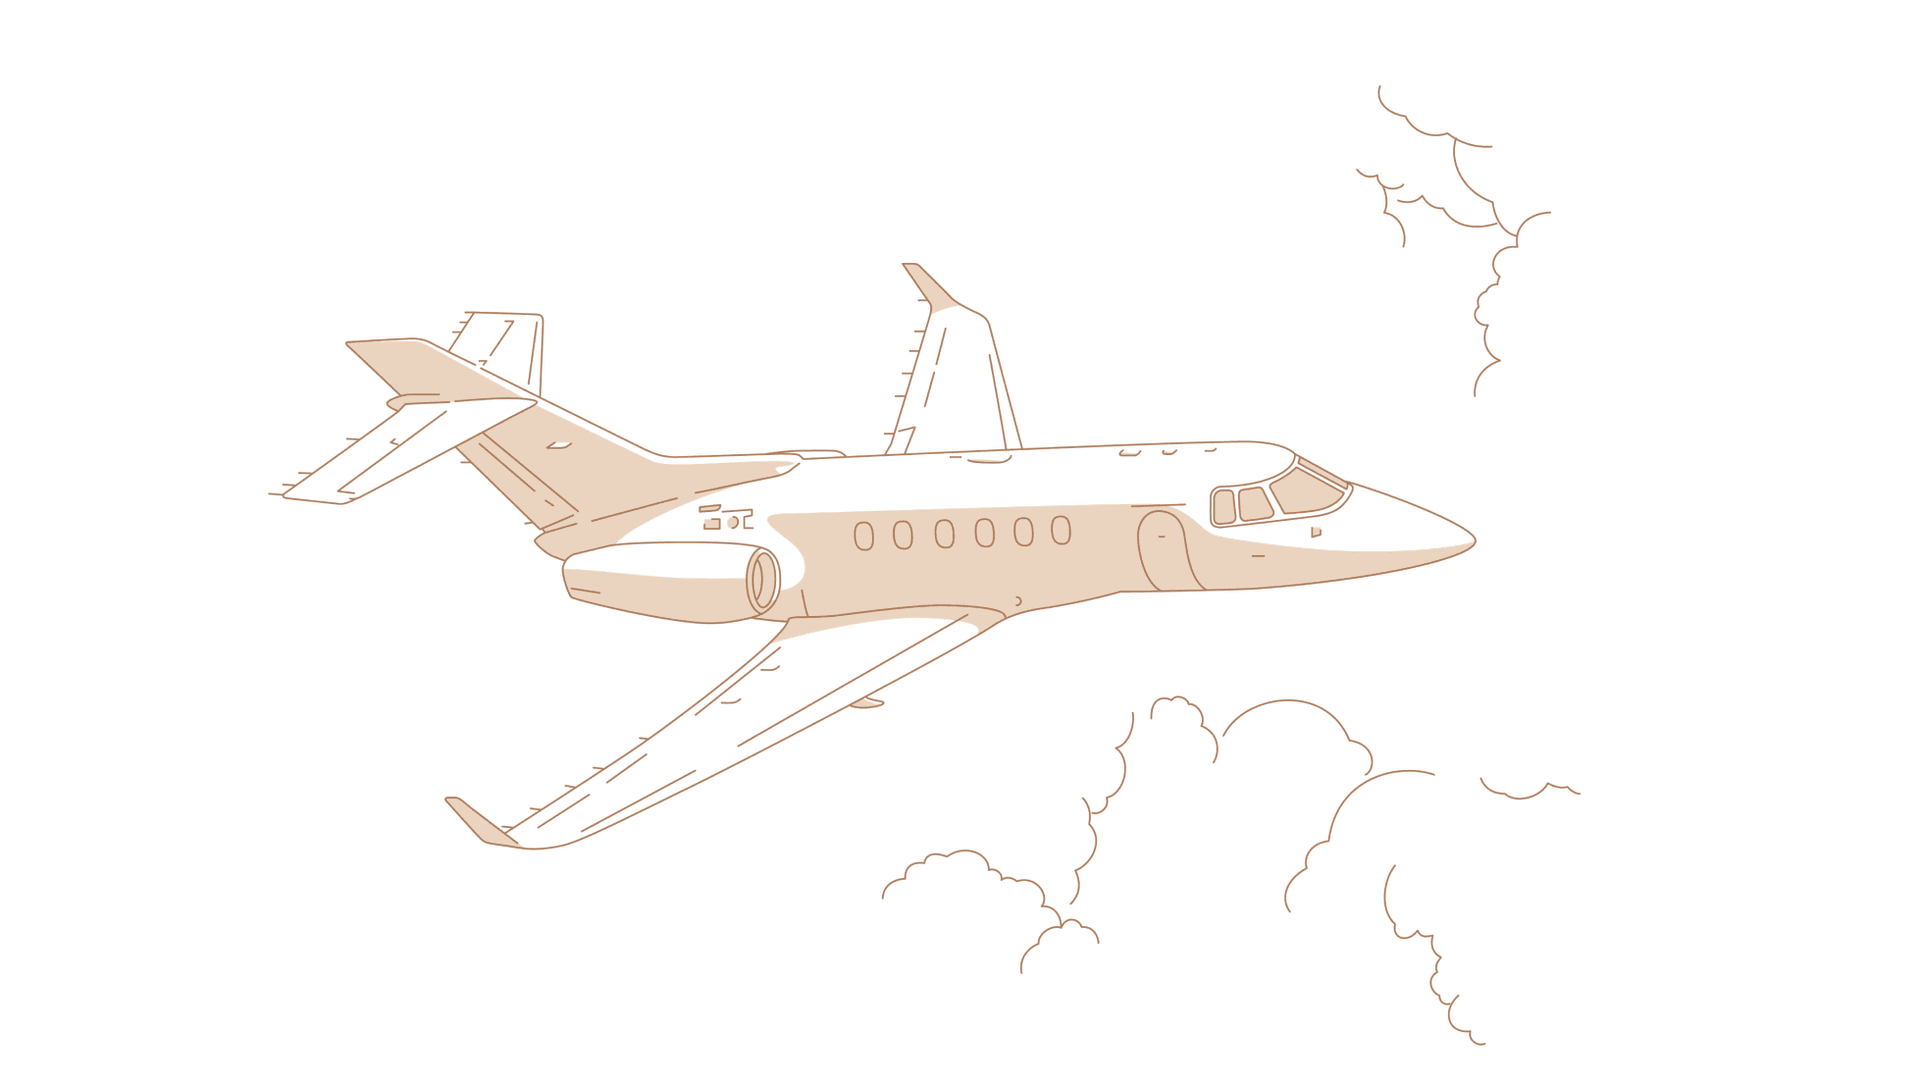 Warm, aspirational illustrations of the various aircraft add atmosphere and allow users to see past specific brands.